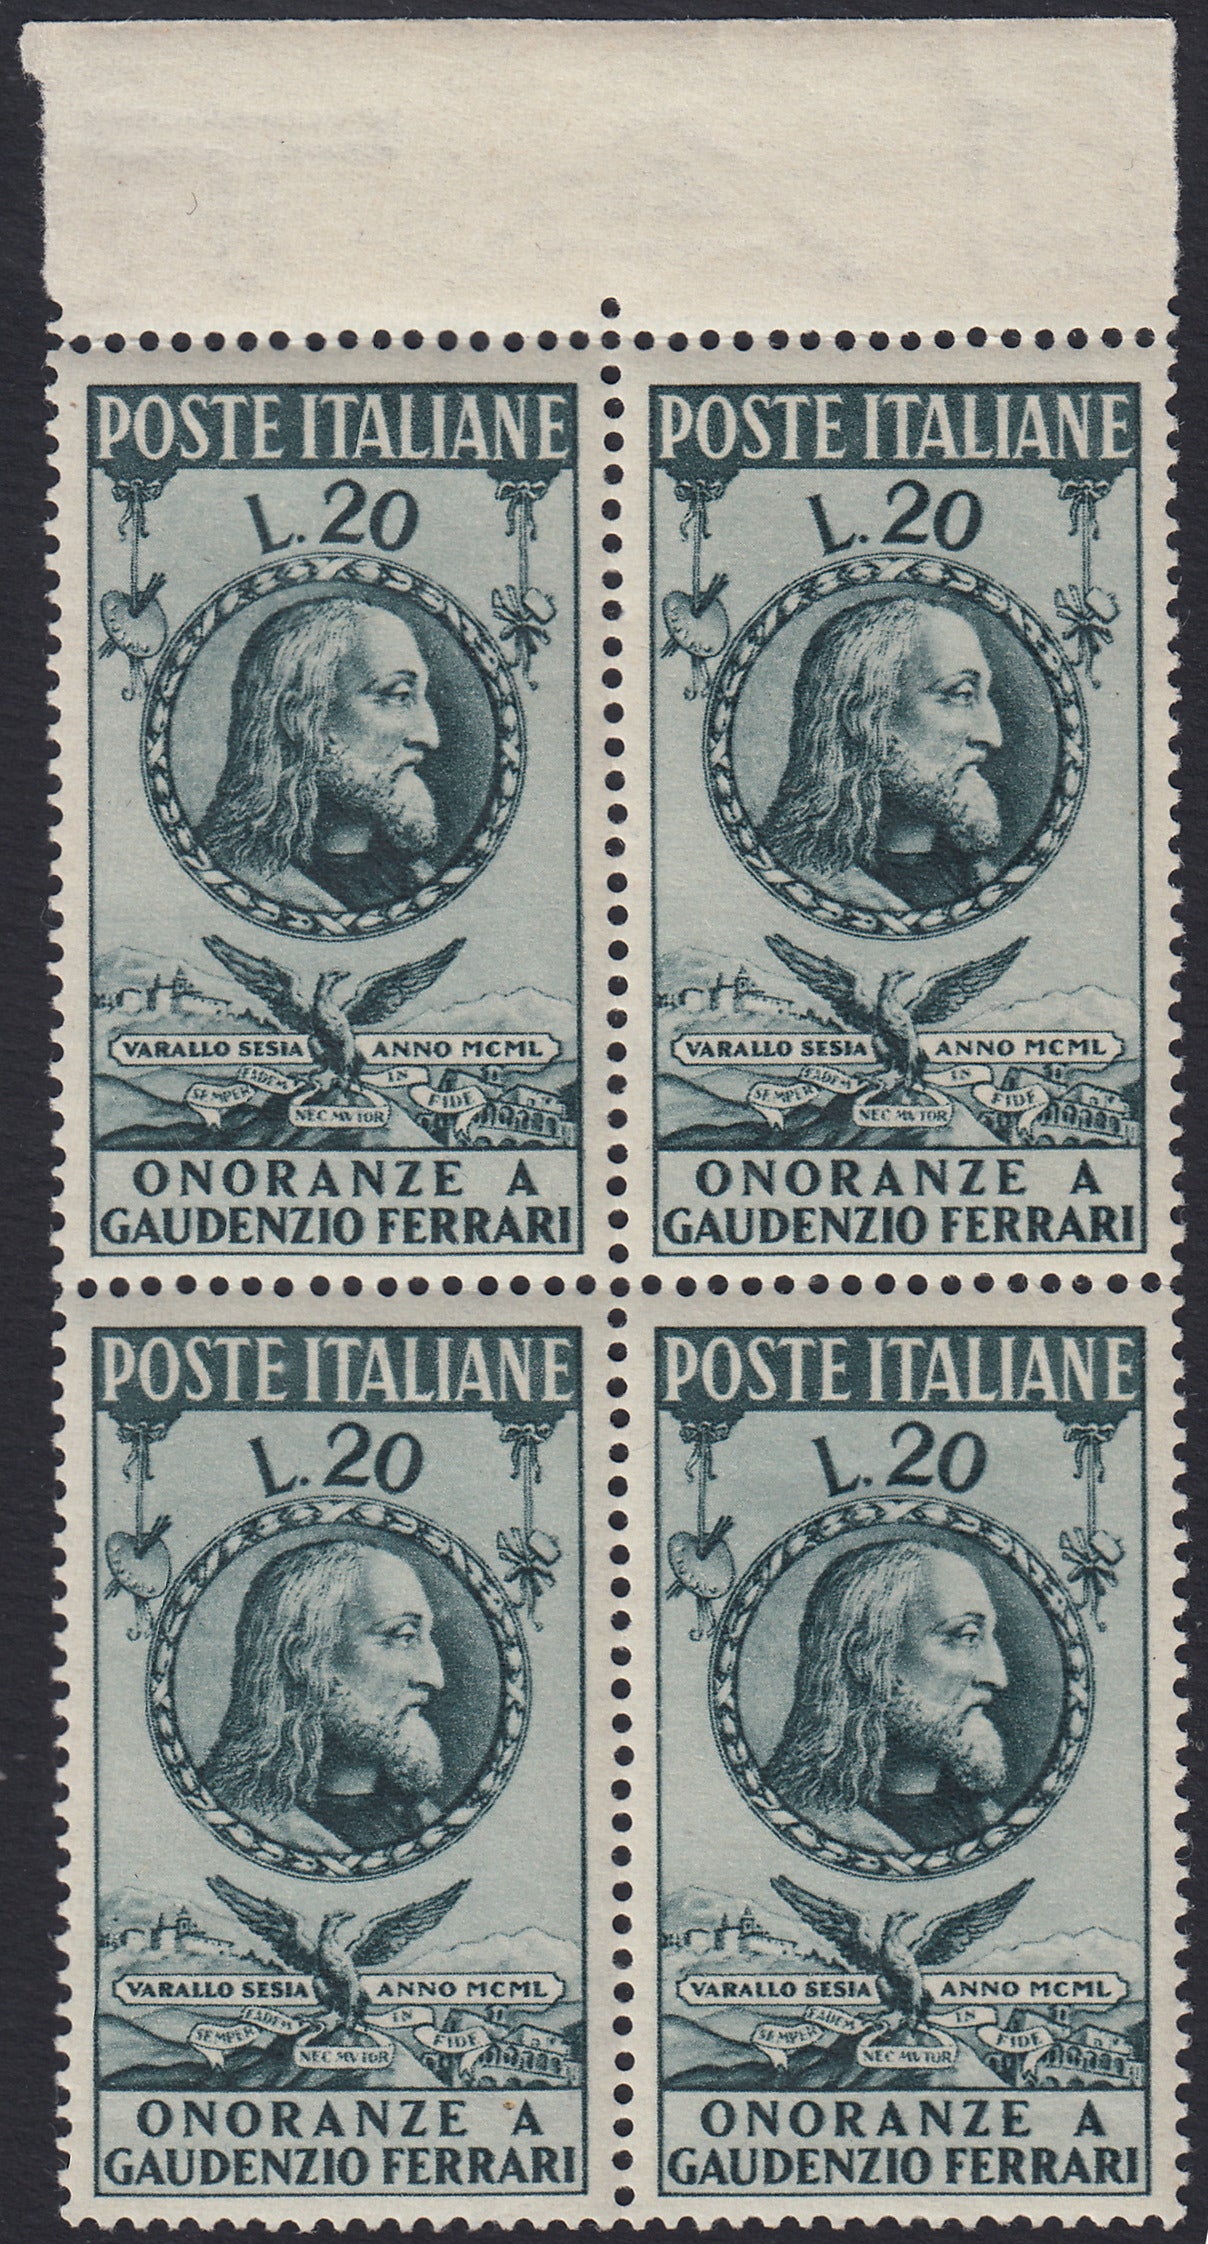 REP69 - 1950 - Winged wheel watermark, Honors to Gaudenzio Ferrari, L. 20 green gray in four sets of new, intact rubber (622)